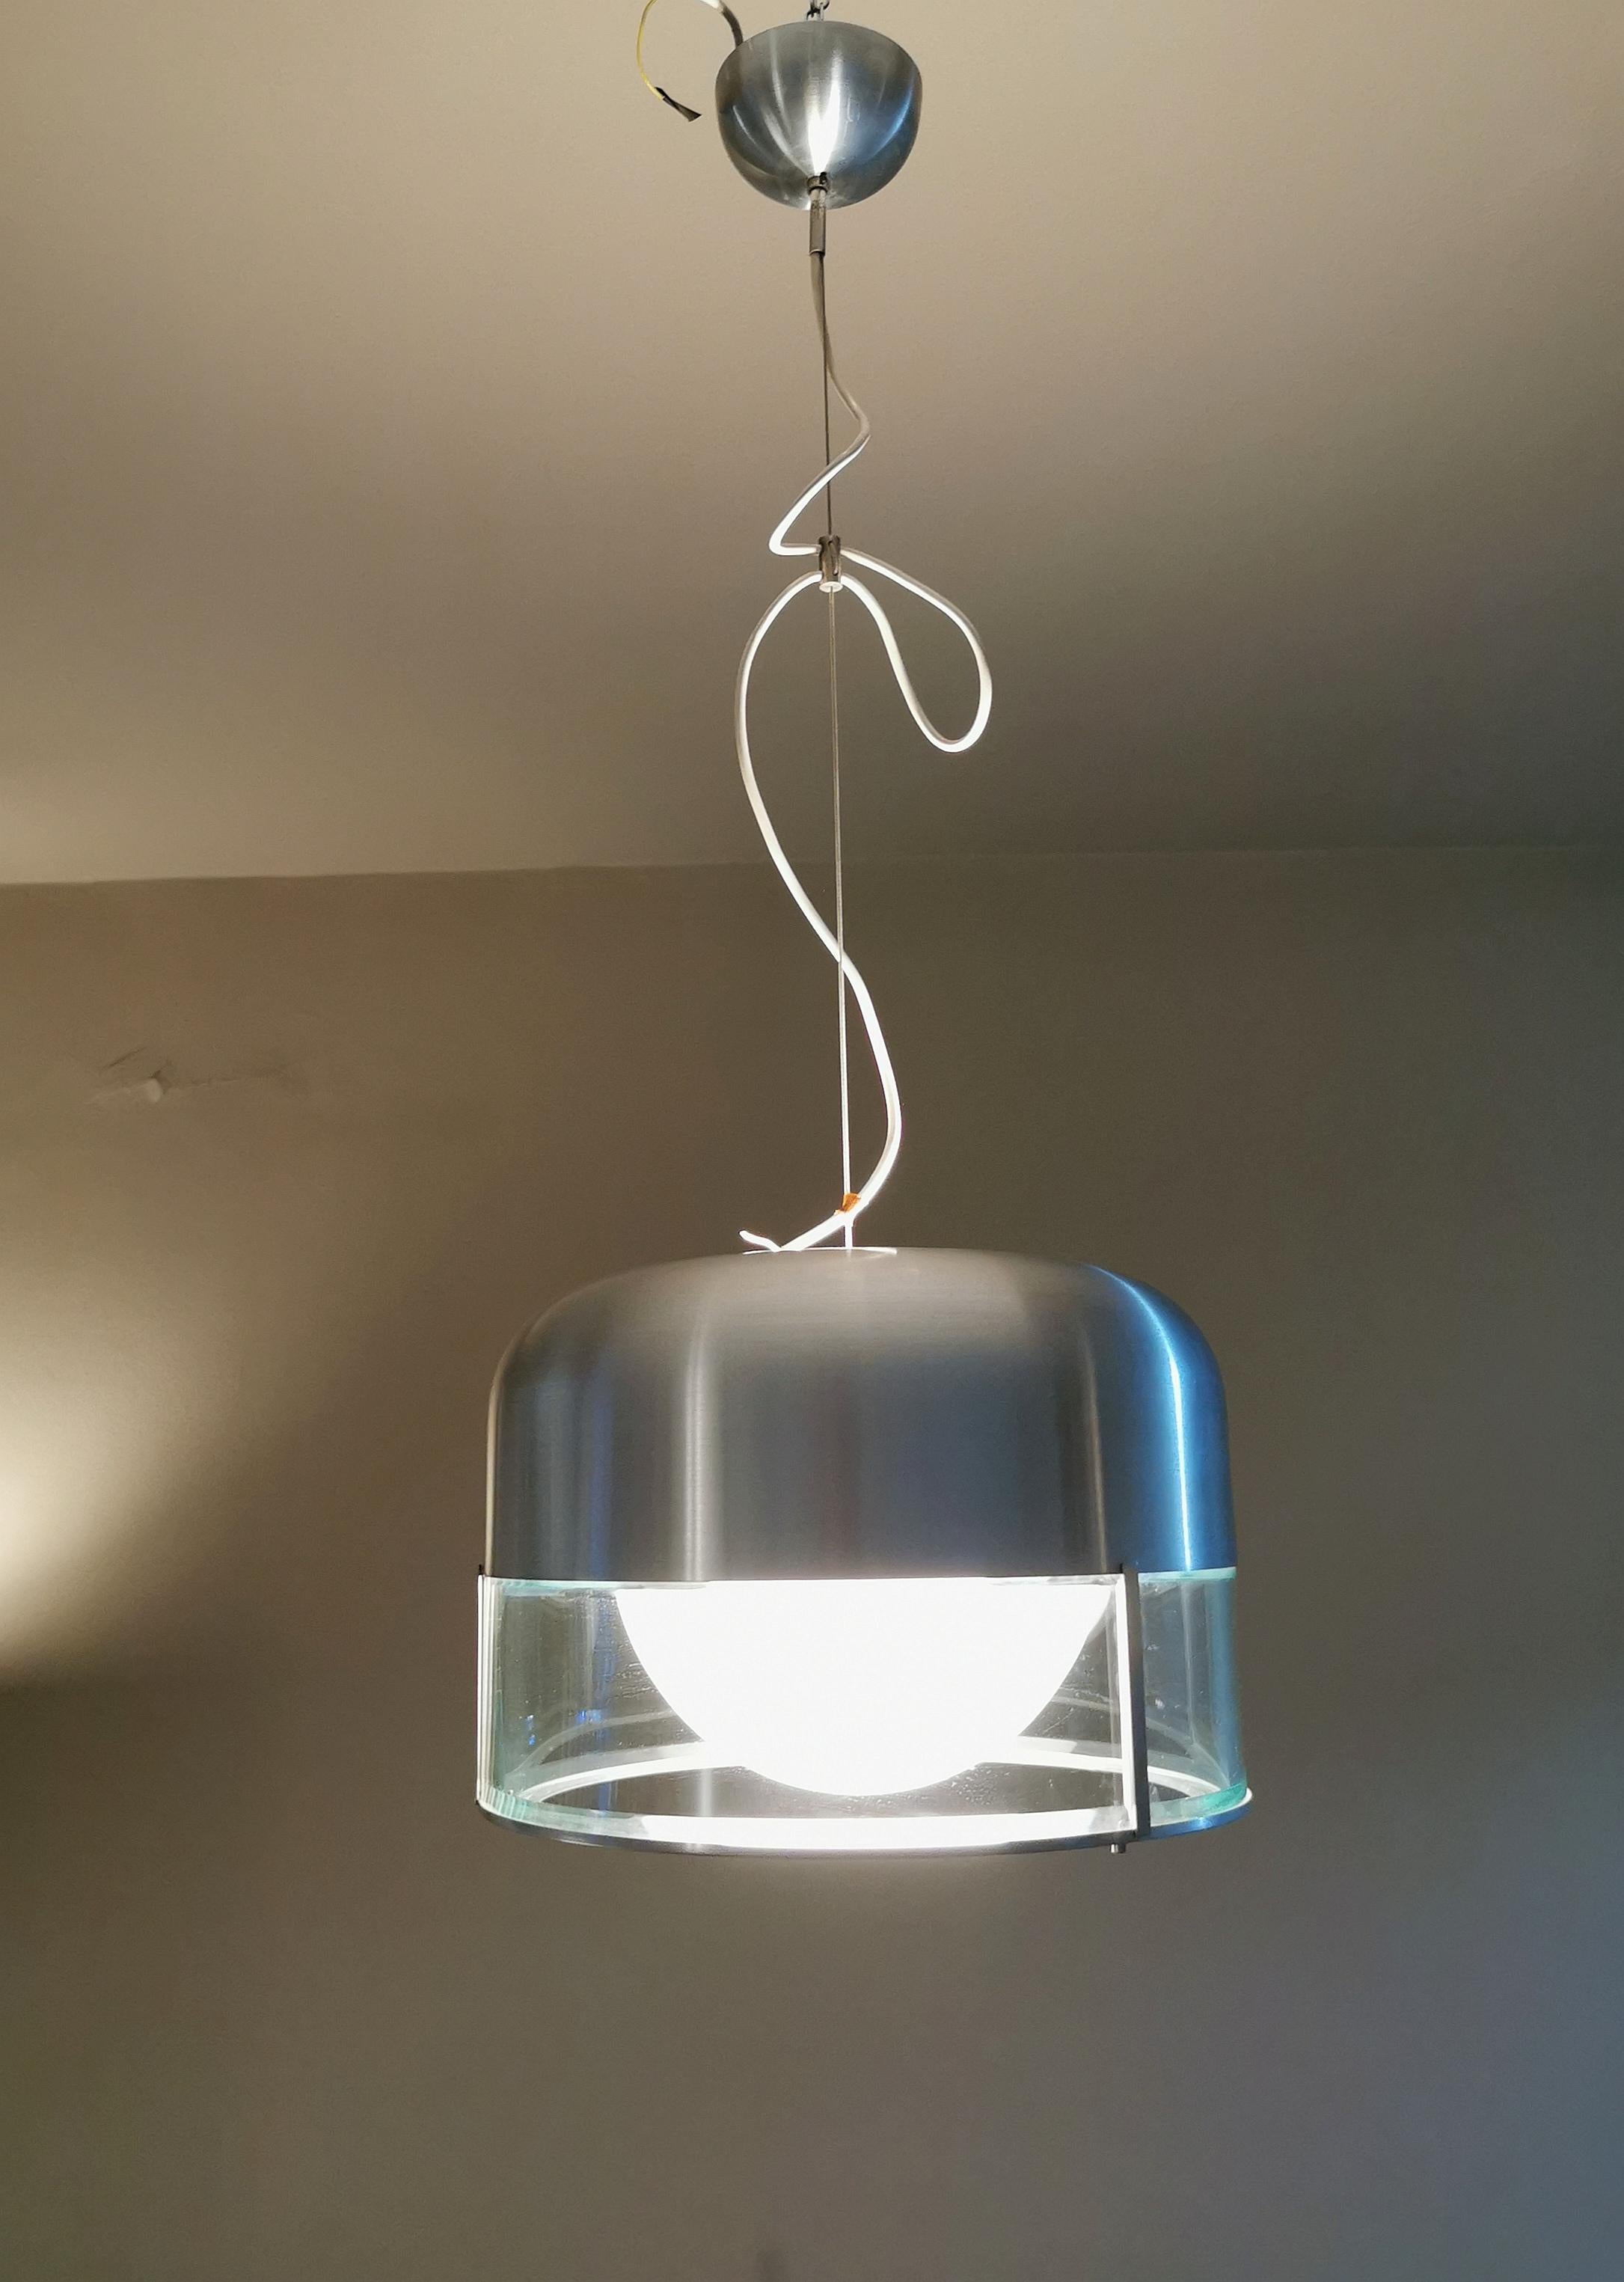 Rare suspension lamp designed by the Italian designer Pia Guidetti Crippa and produced by the Milanese company LUMI in the 70s. The lamp has a brushed aluminum structure, 3 transparent curved glasses and a white central one. It lights up both at the